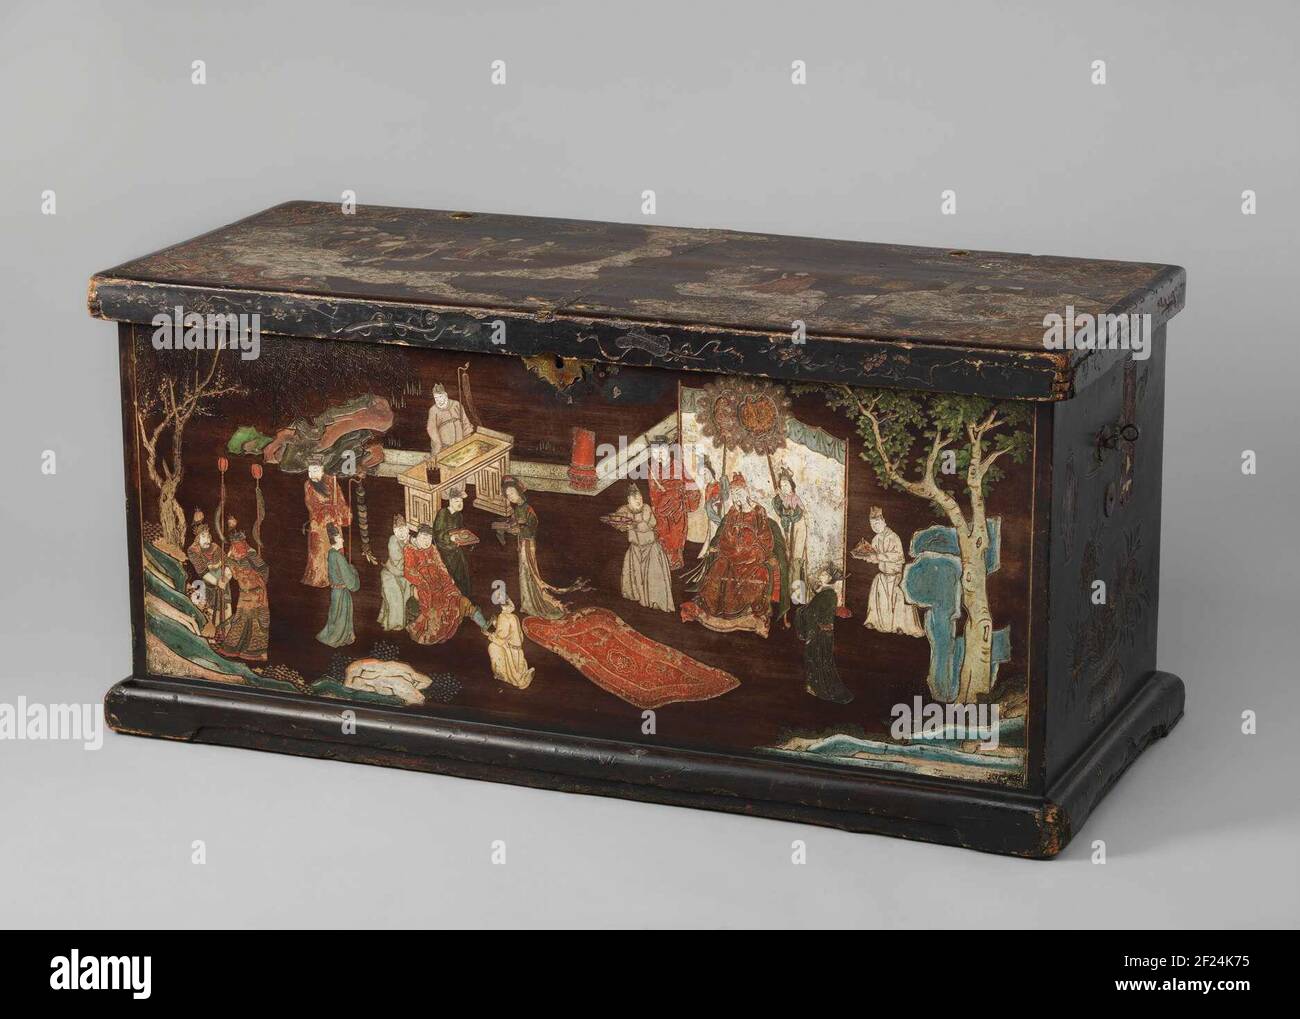 Kist met deksel, versierd met voorstellingen in "gesneden" lak..Coffin with  lid decorated with performances in "sliced" lacquer in red, blue, white and  green on black ground. On the front the poet li